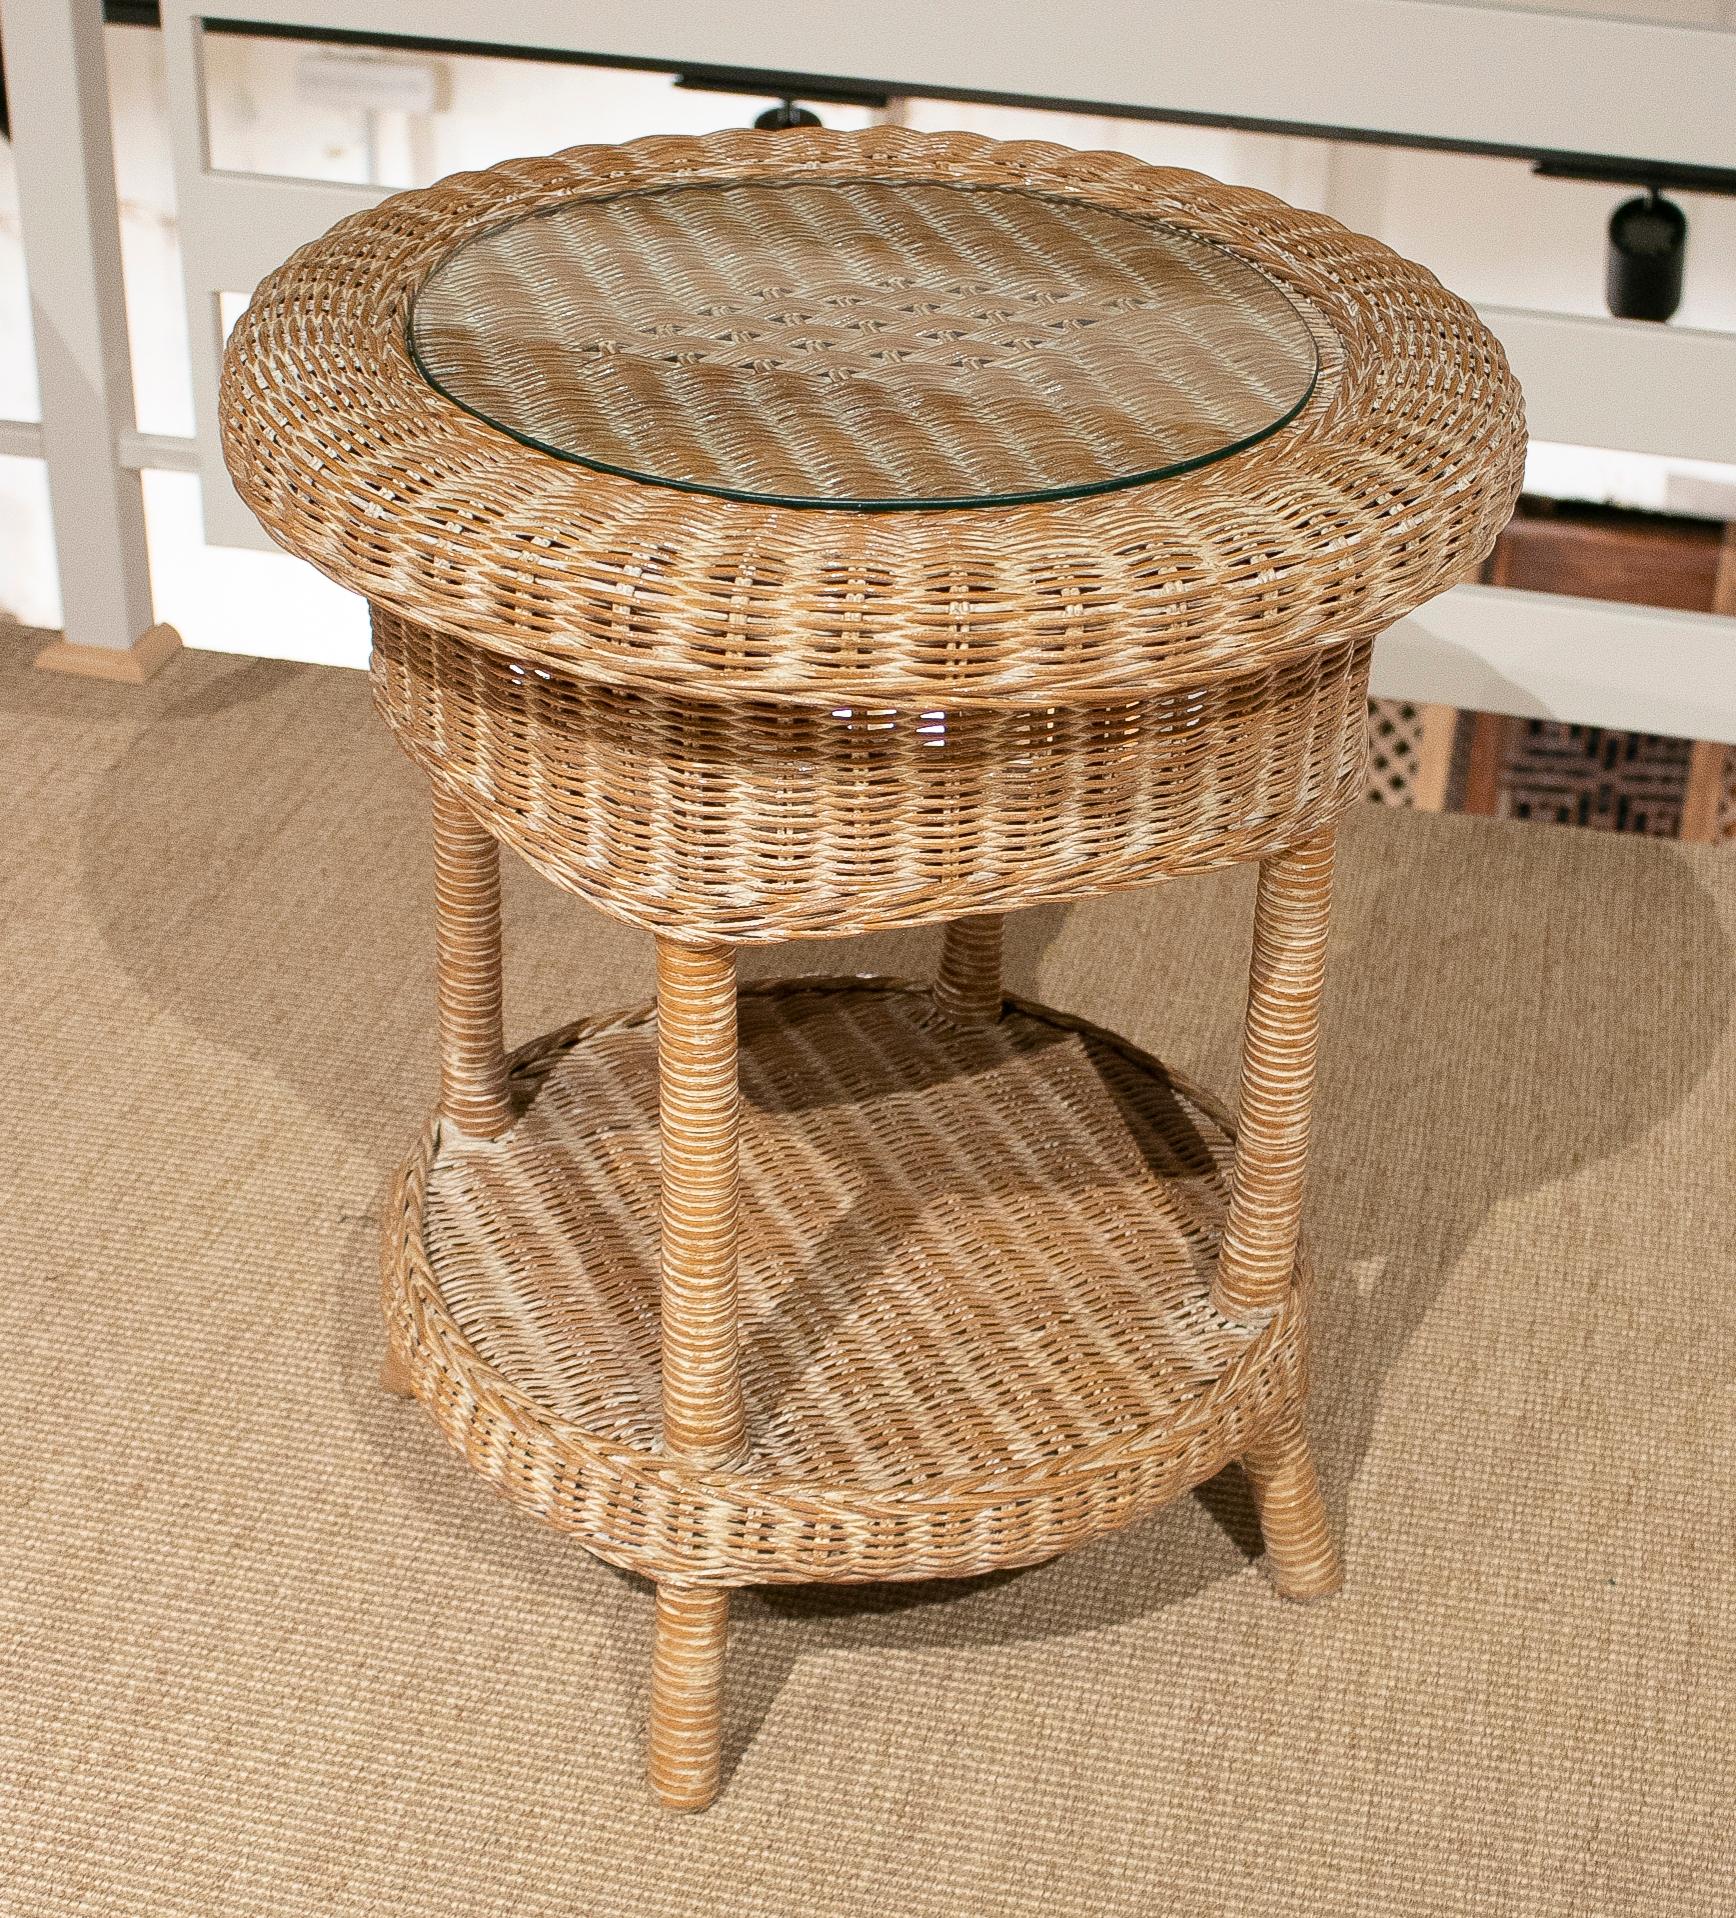 vintage wicker side table with glass top